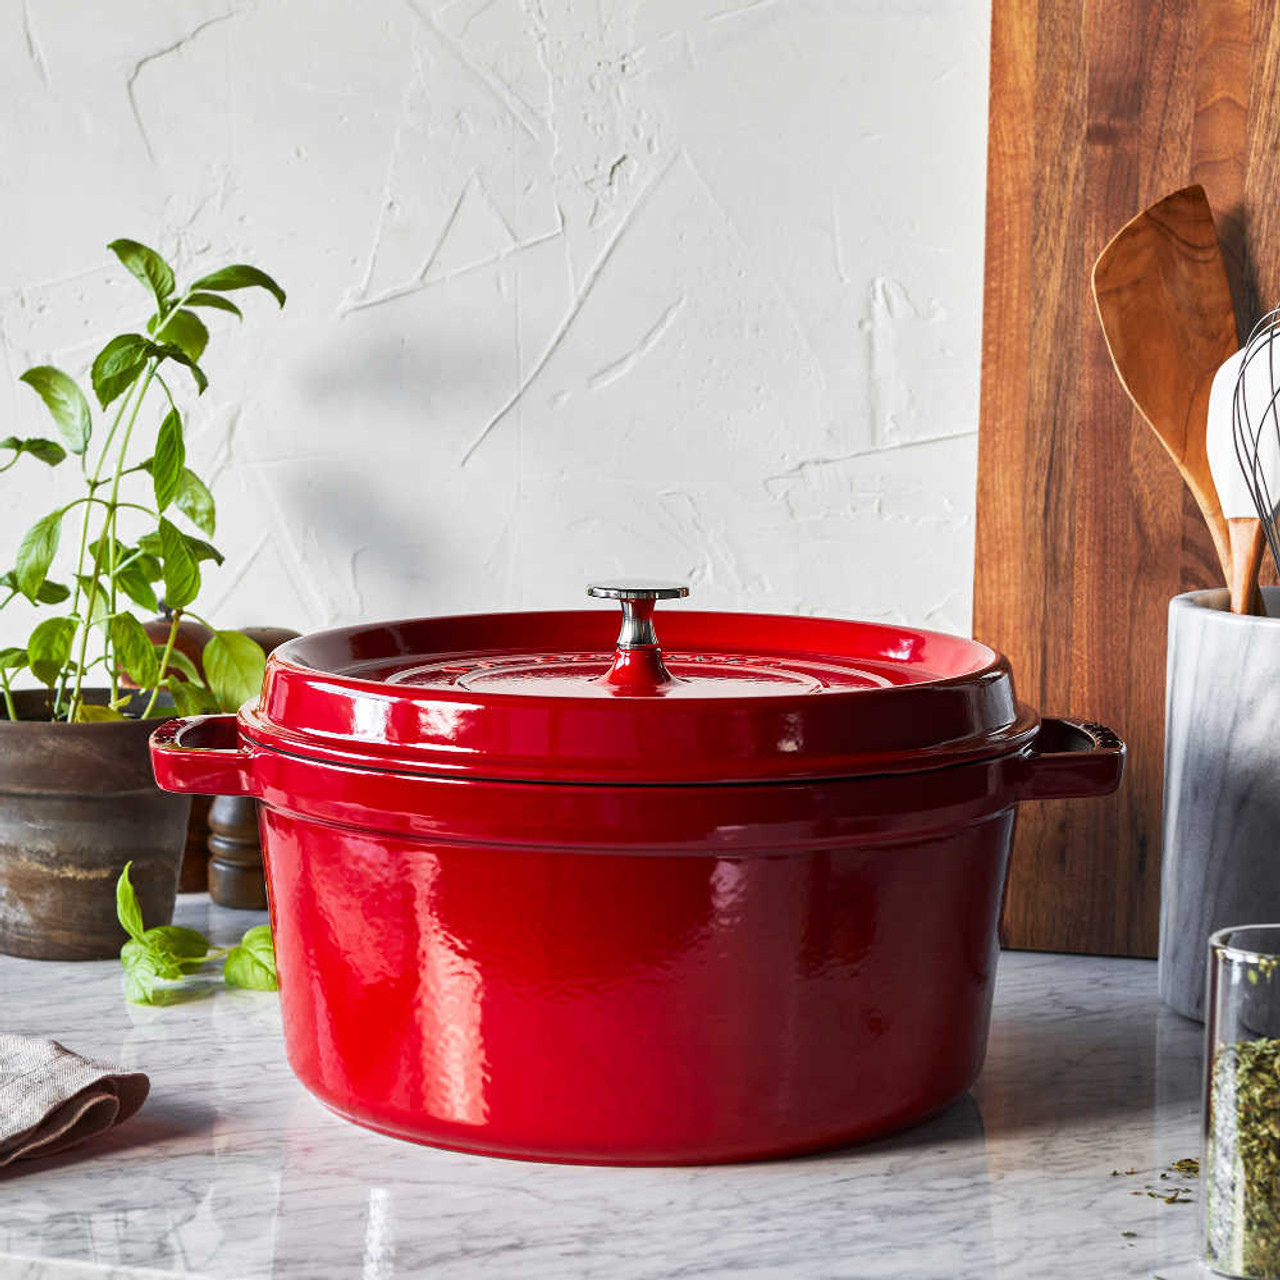 https://cdn11.bigcommerce.com/s-hccytny0od/images/stencil/1280x1280/products/5817/26573/Staub_Cast_Iron_Round_Cocotte_in_Cherry_1__15097.1702420729.jpg?c=2?imbypass=on